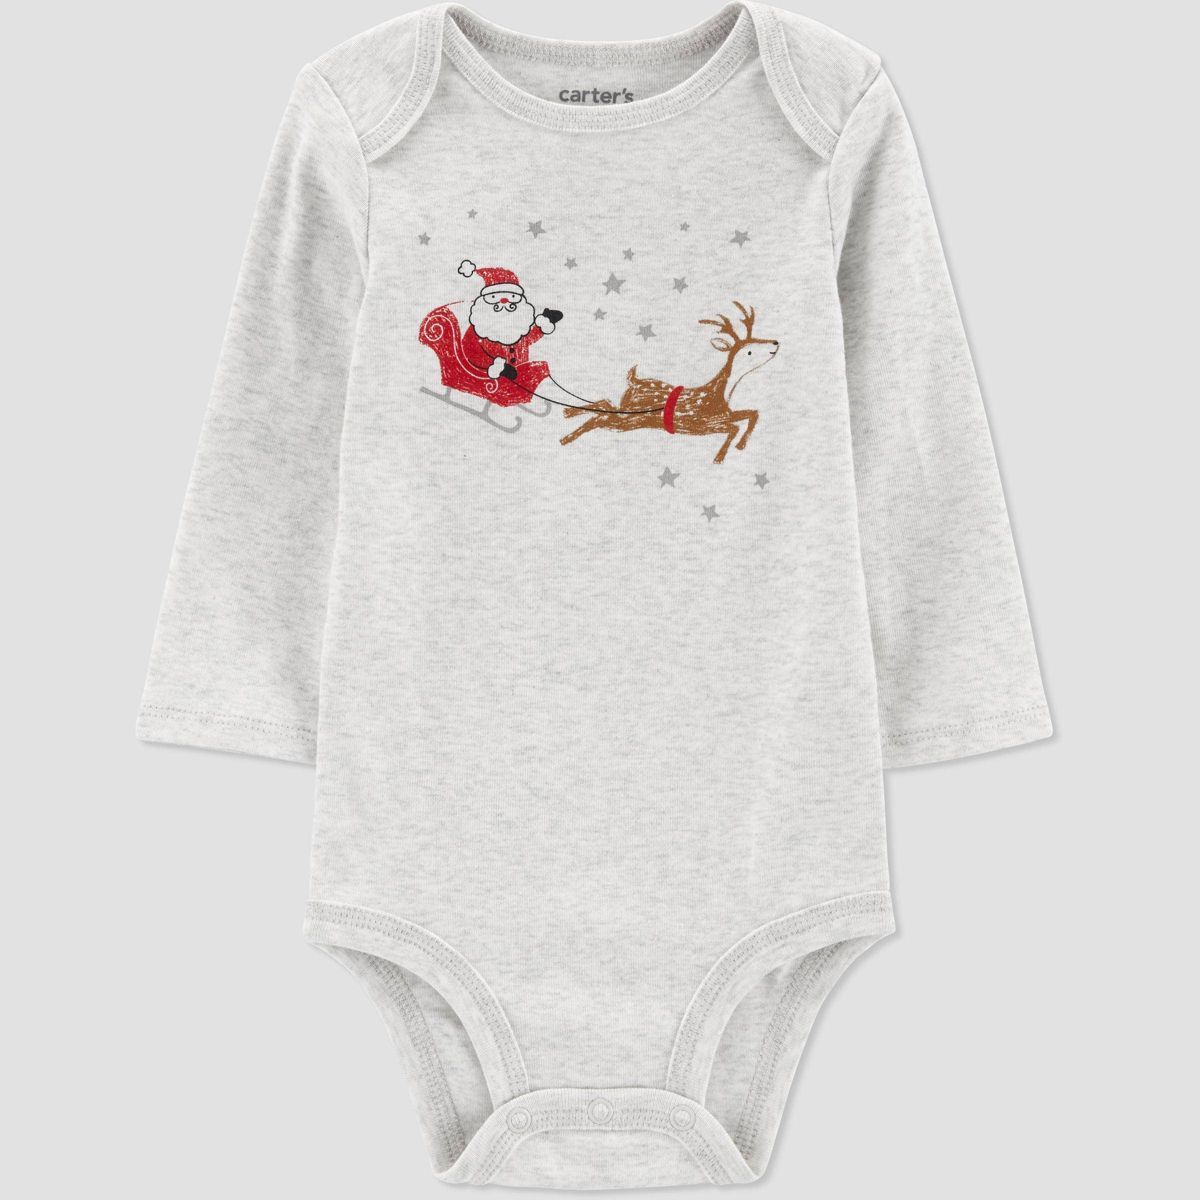 Carter's Just One You®️ Santa Sleigh Baby Bodysuit - Gray | Target